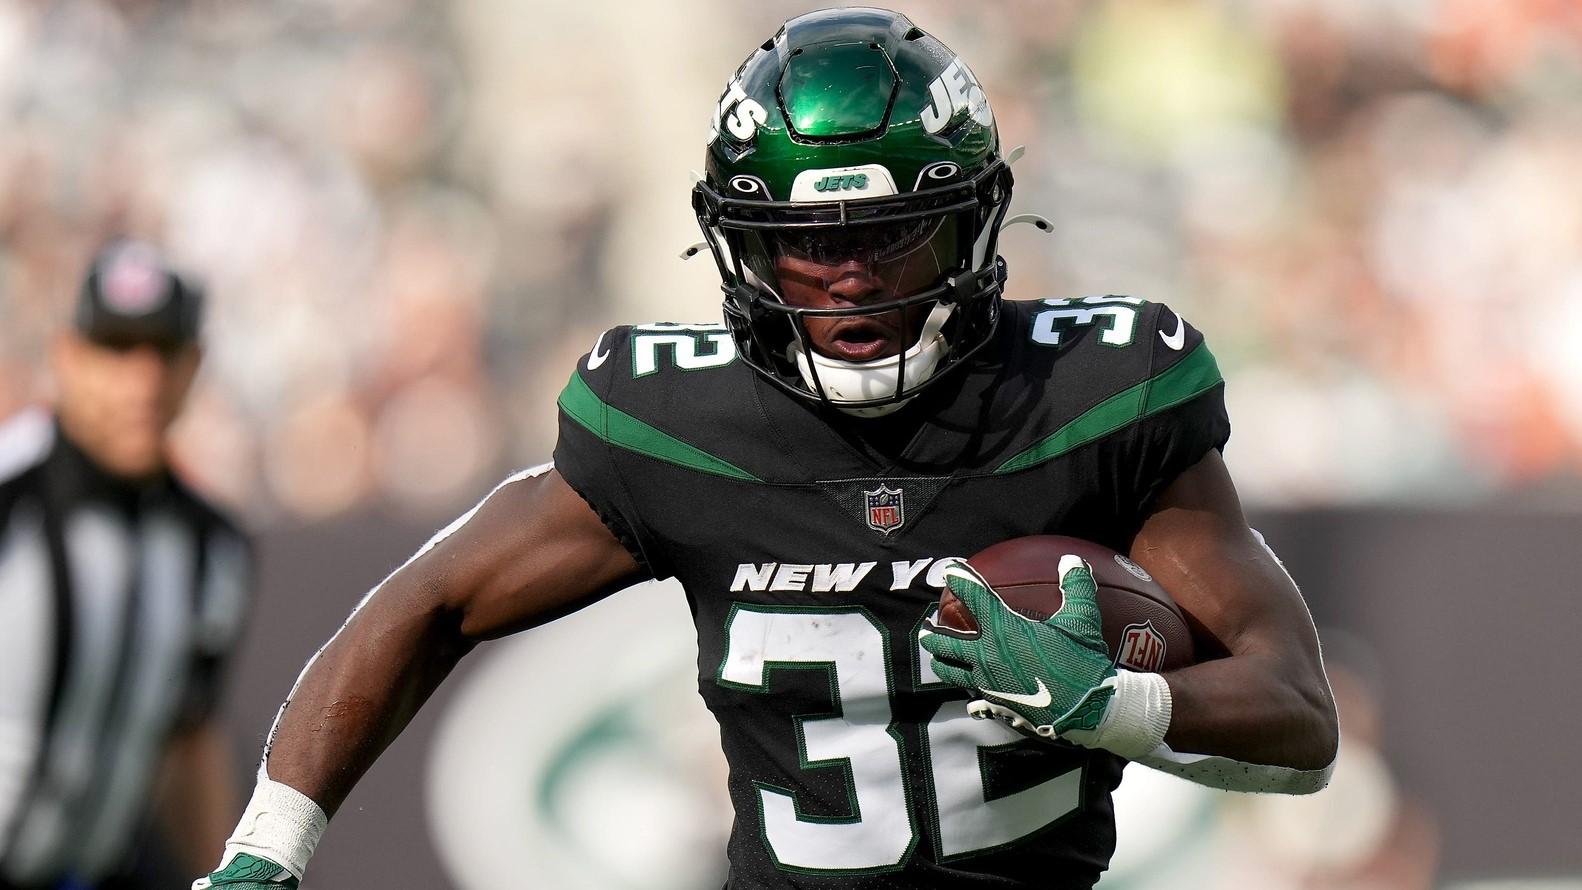 New York Jets running back Michael Carter (32) carries the ball on a touchdown run in the first quarter during a Week 8 NFL football game against the Cincinnati Bengals, Sunday, Oct. 31, 2021, at MetLife Stadium in East Rutherford, N.J. / Kareem Elgazzar / USA TODAY NETWORK